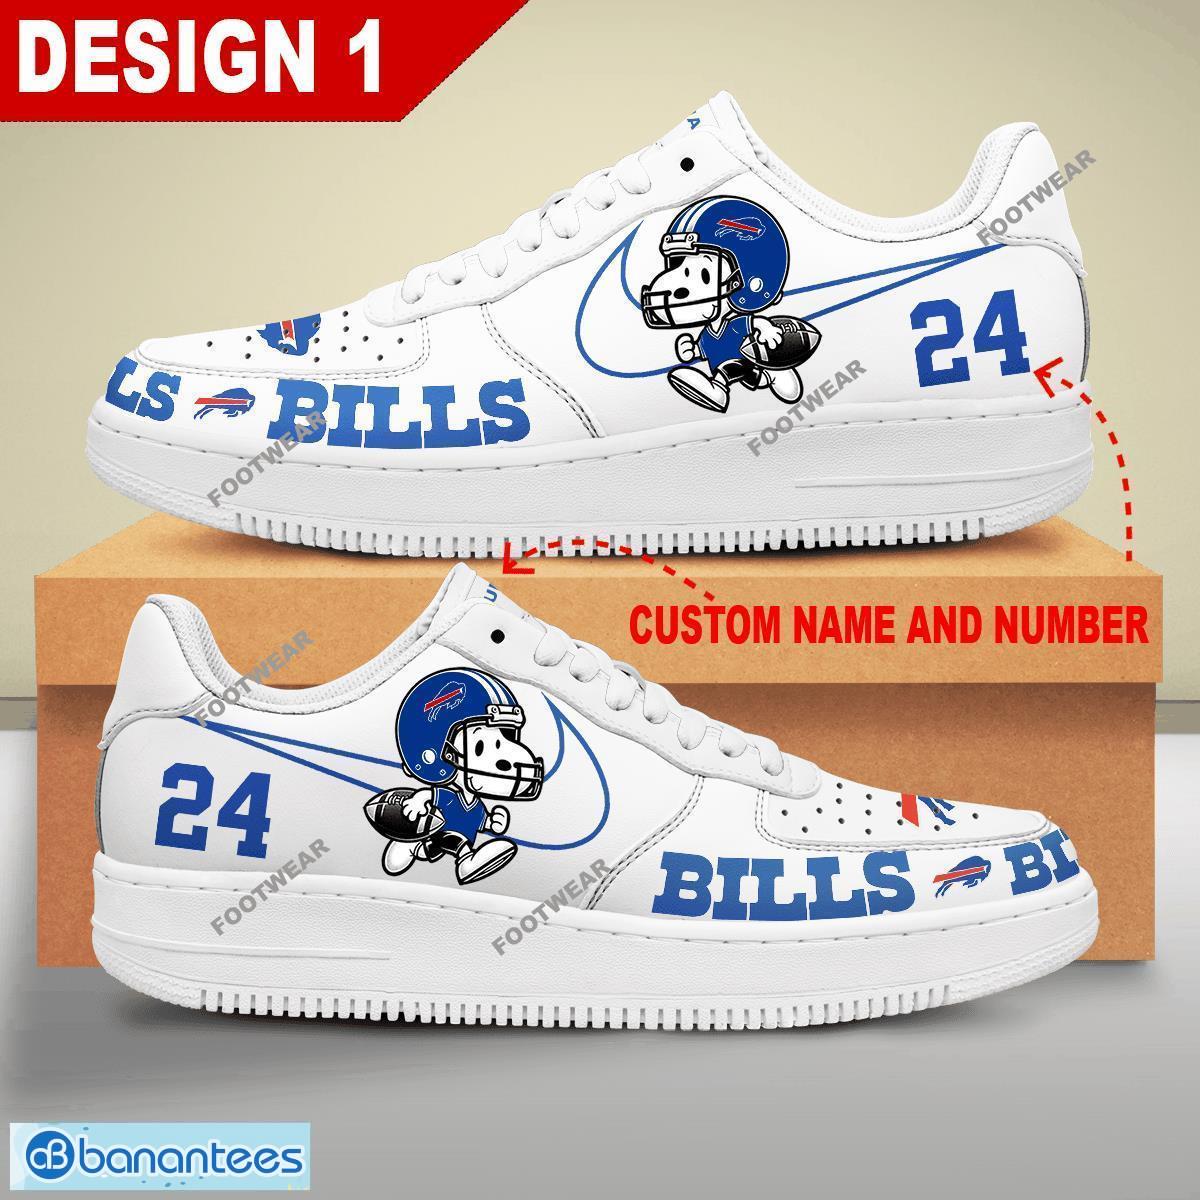 Custom Number And Name NFL Buffalo Bills Snoopy Play Funny Football Air Force 1 Shoes Multiple Design - NFL Buffalo Bills Snoopy Play Football Personalized Air Force 1 Shoes Design 1